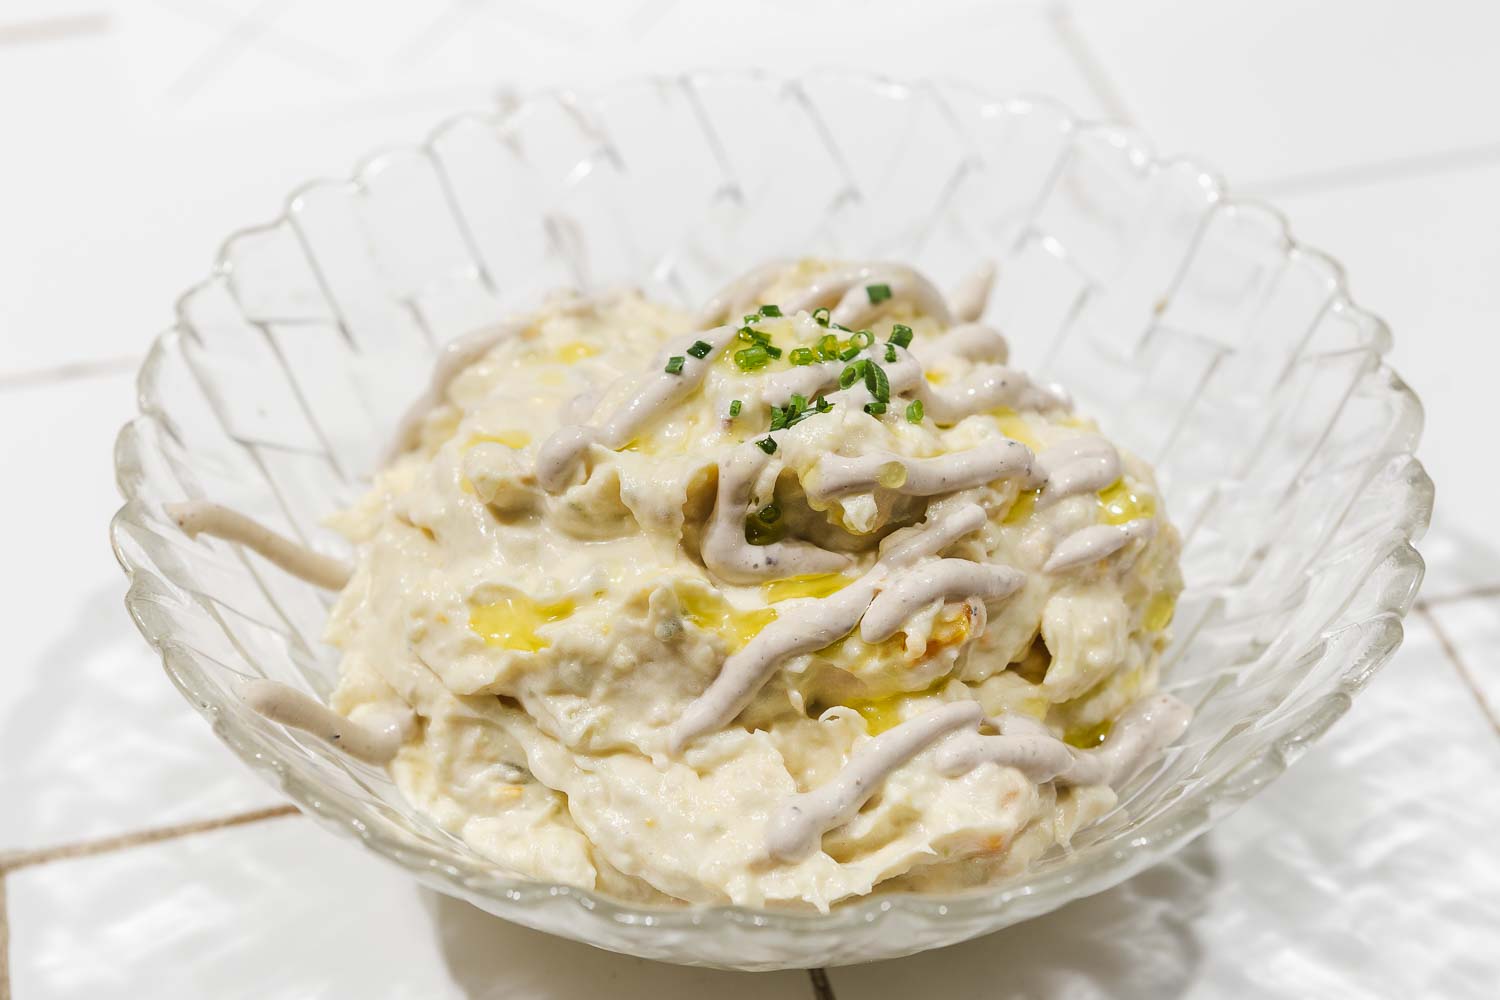 Our Russian salad with marinated tuna